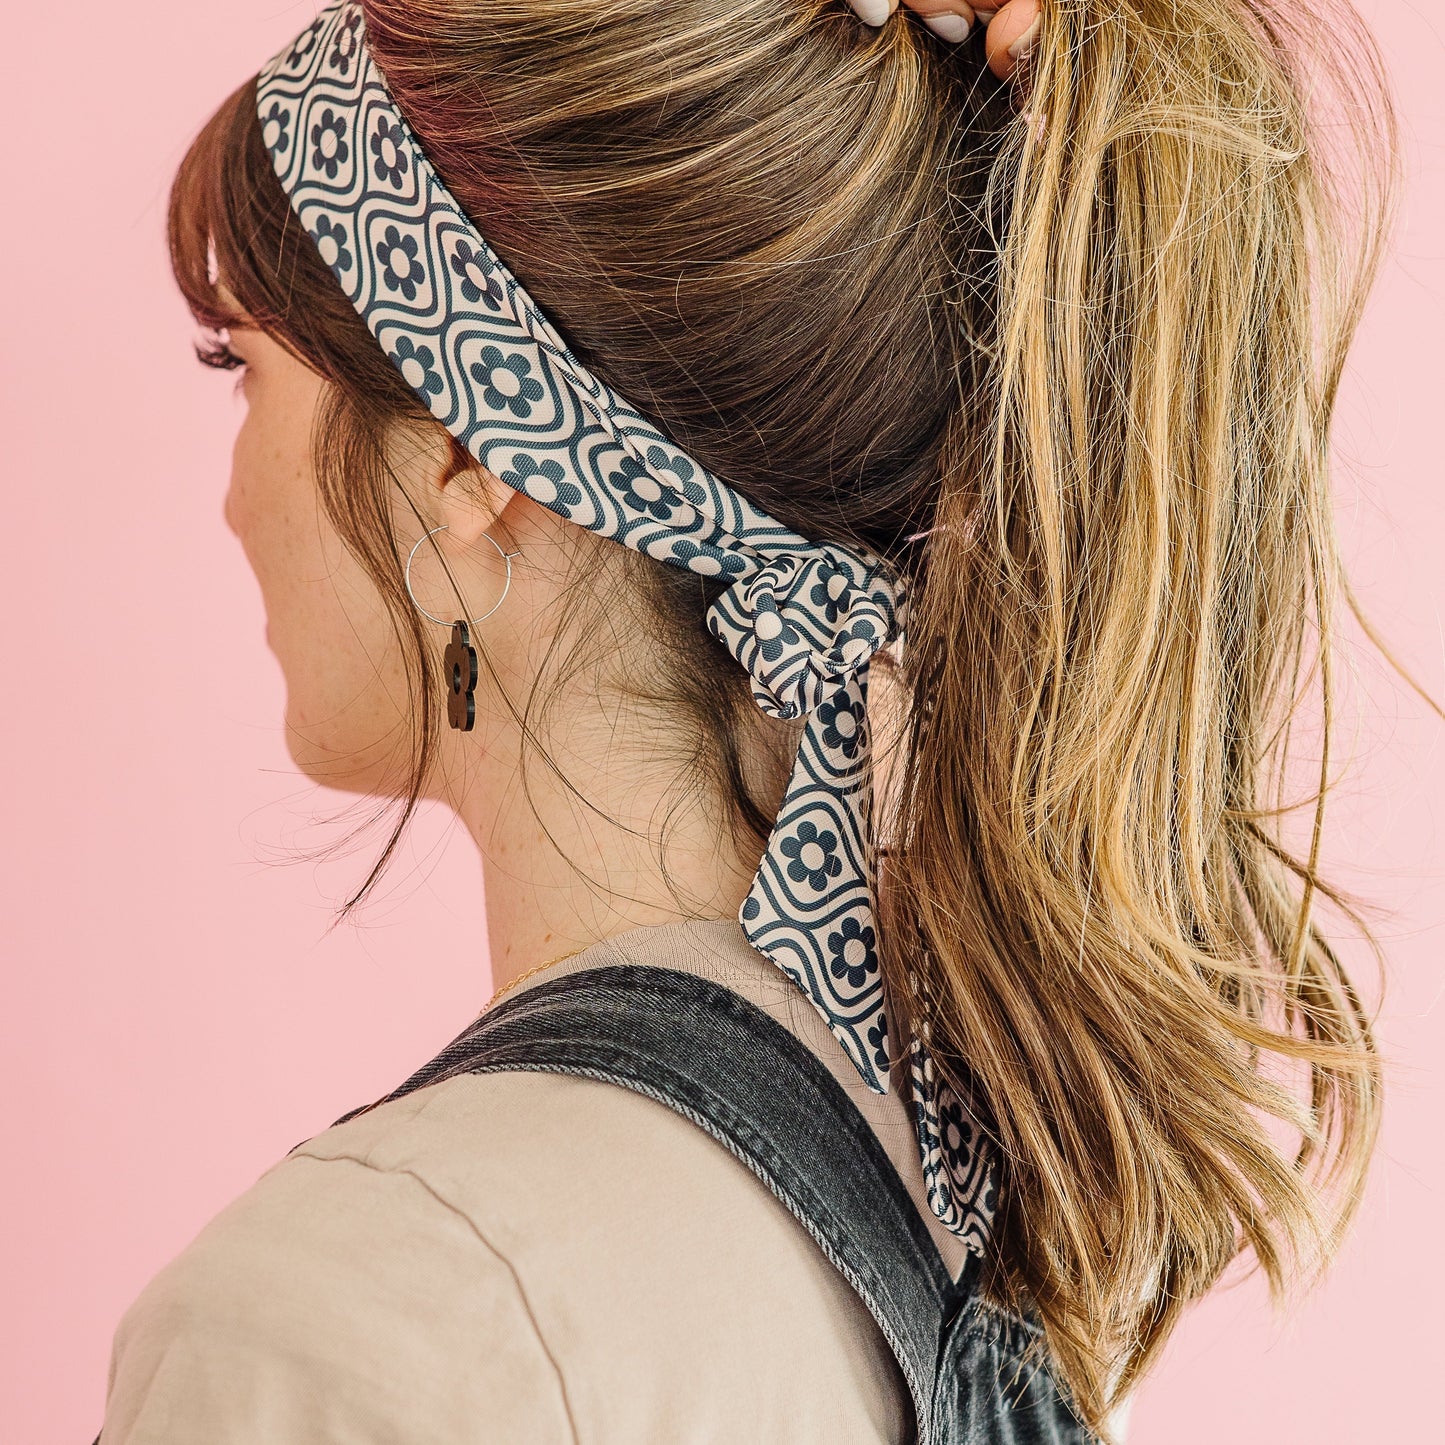 THE BEST EARRINGS/HEADBAND in Daisy Paisley + White Daisy Hoops/ Statement Accessories